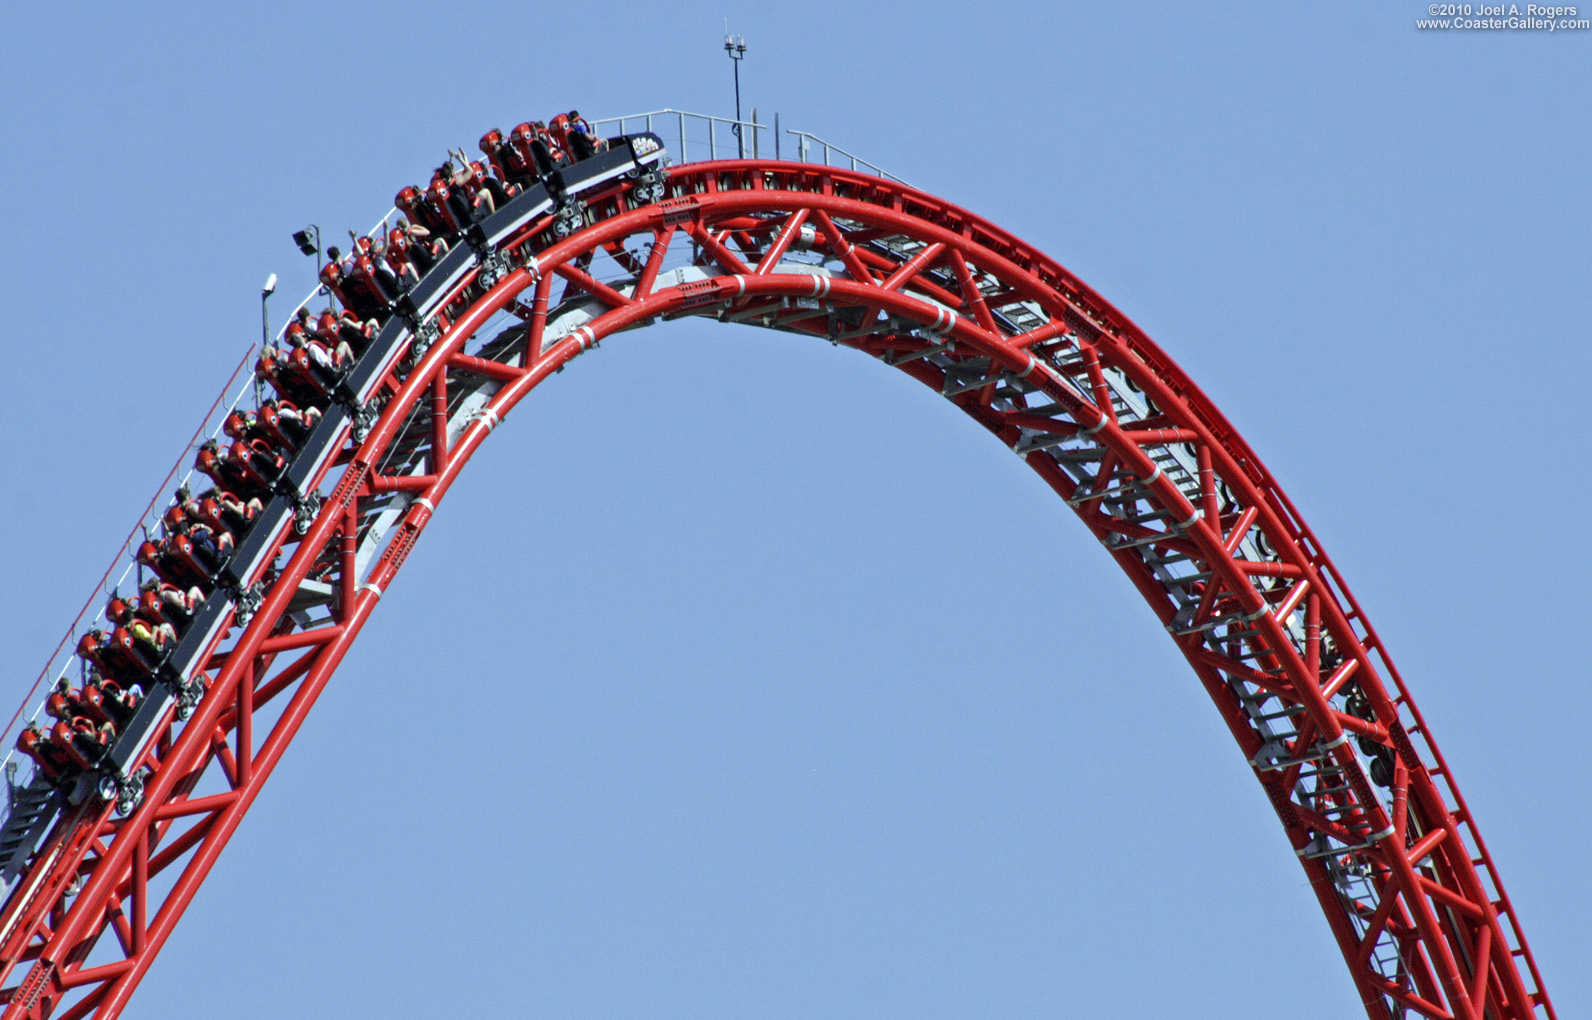 Close-up of the lift hill on Intimidator 305